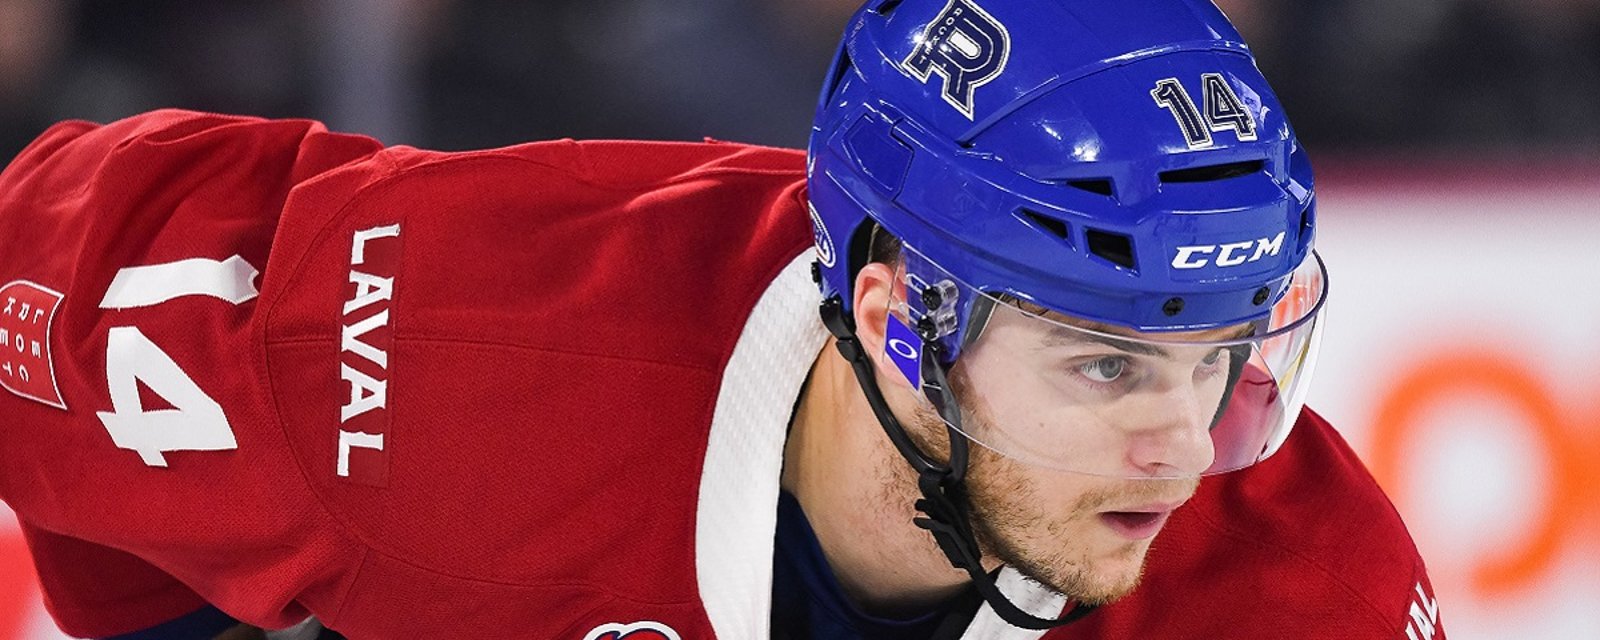 The Canadiens have traded Matthew Peca to the Ottawa Senators for 2 assets.